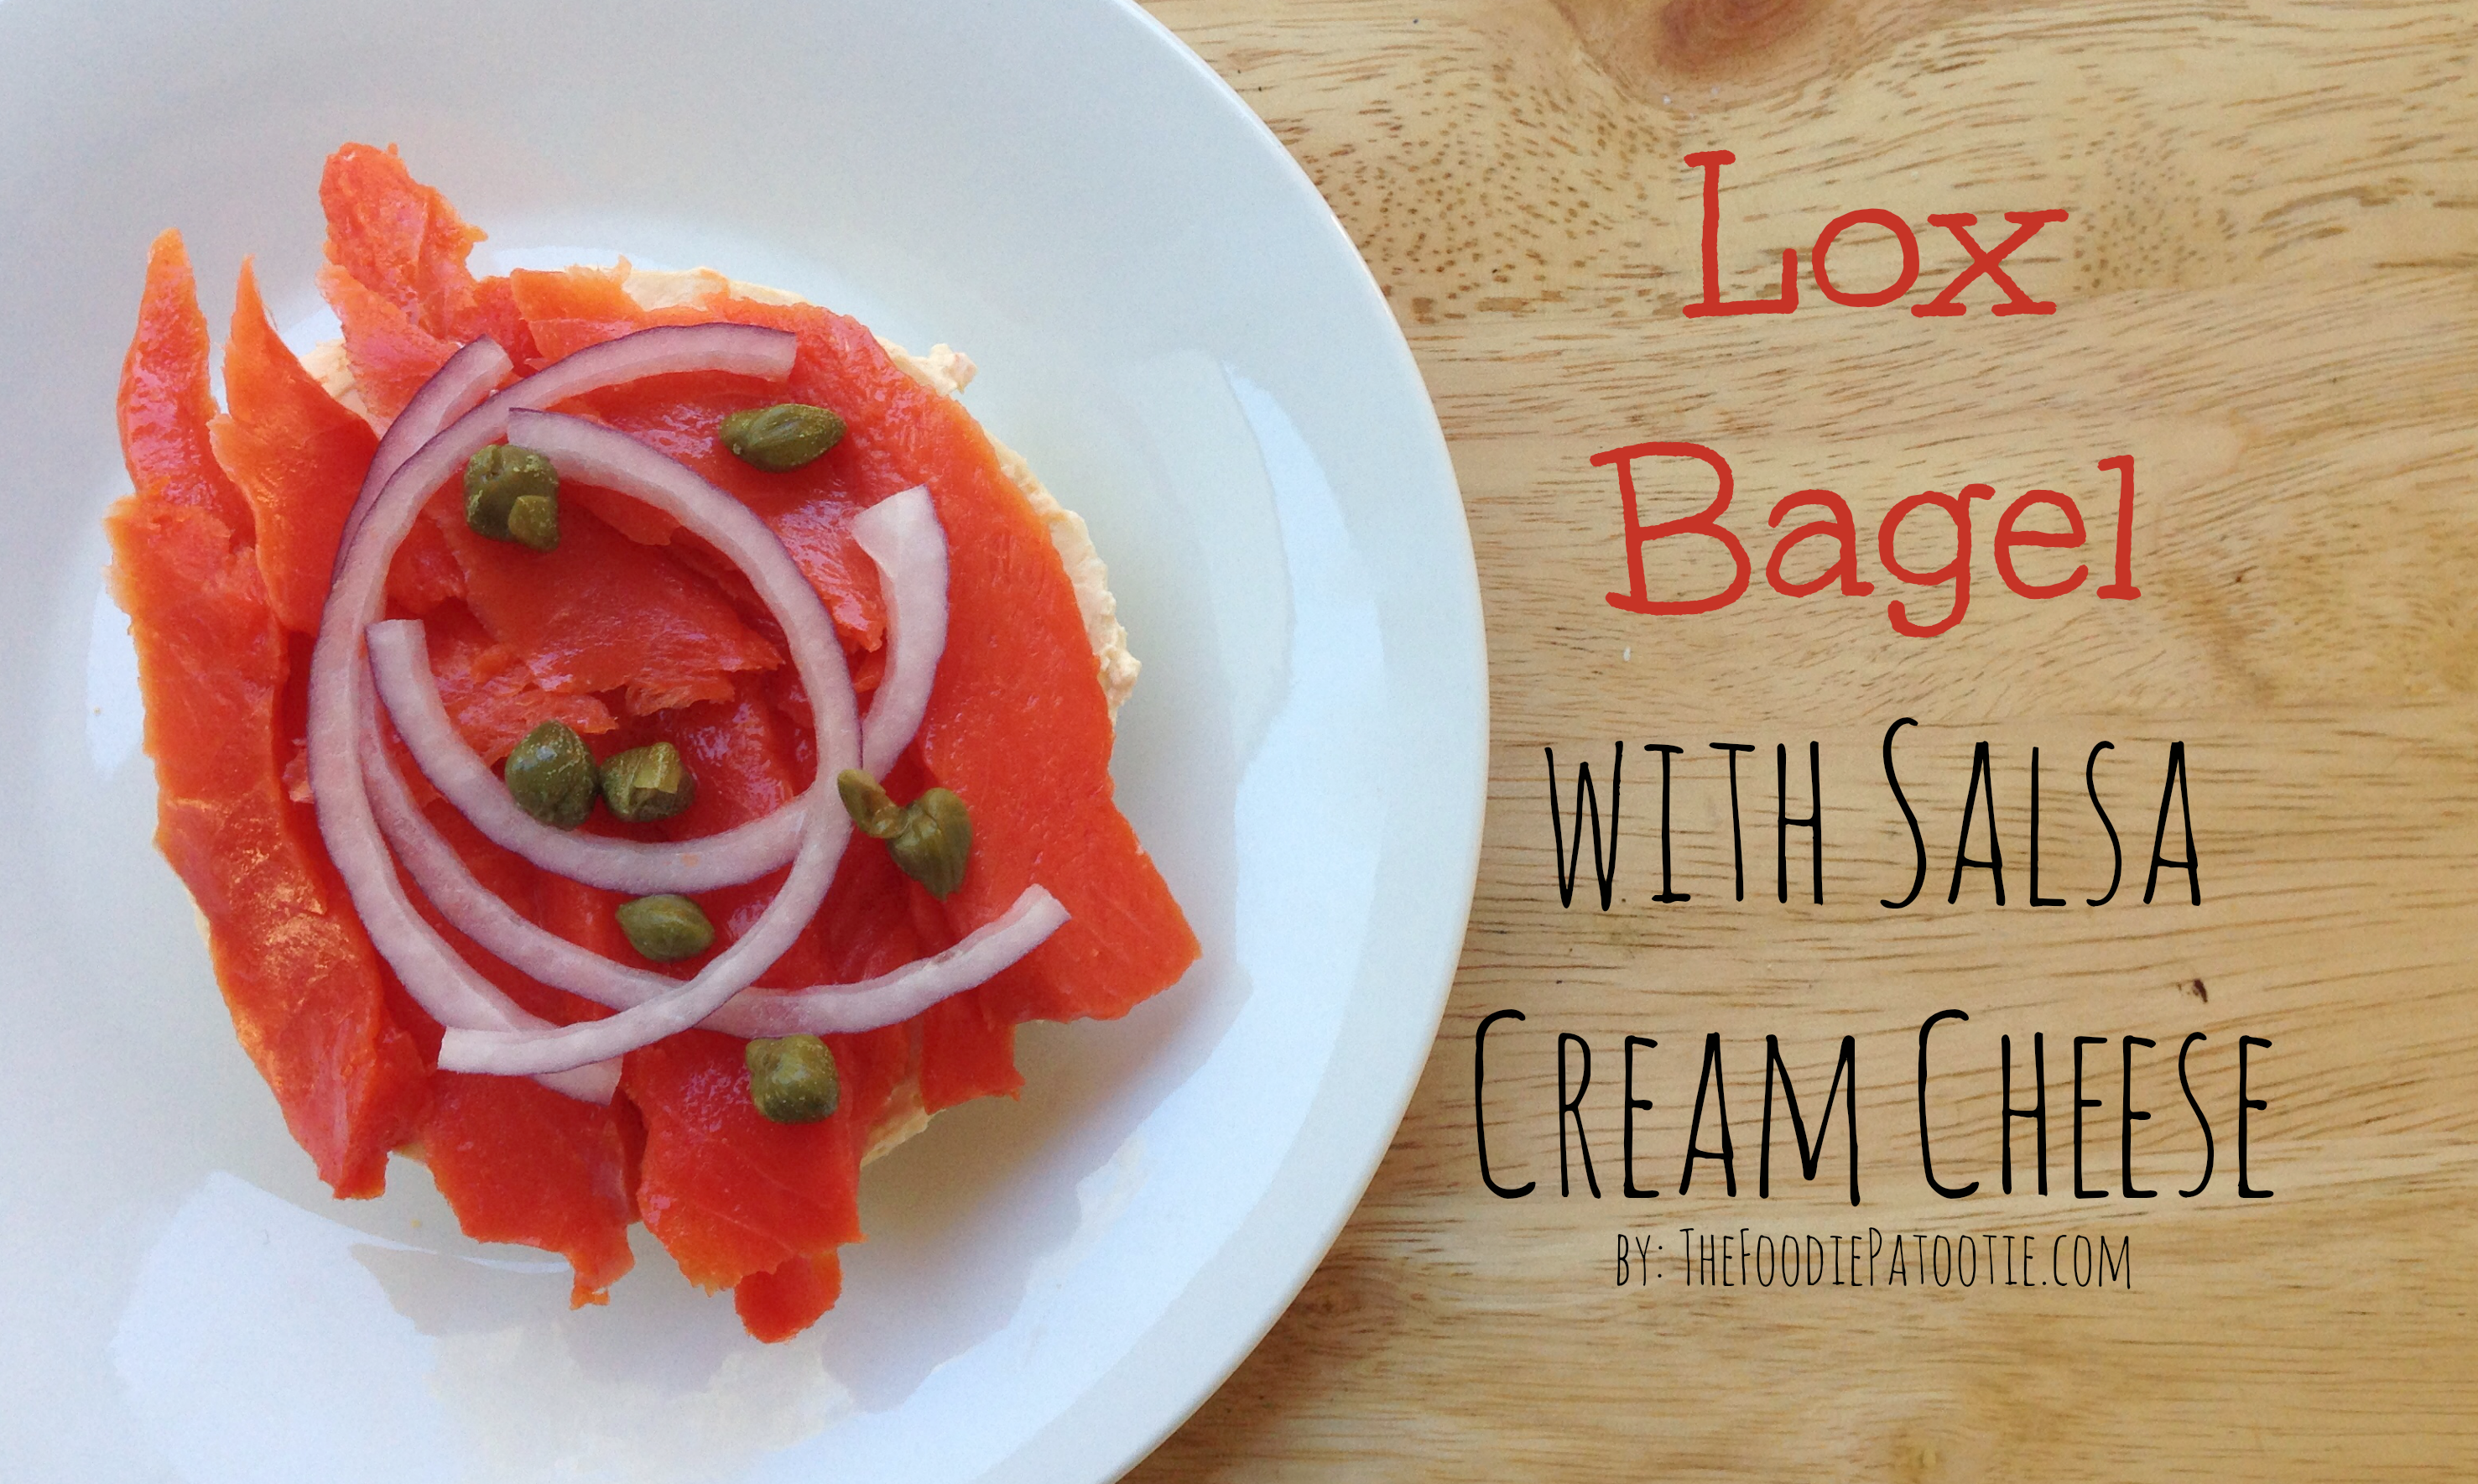 National Bagels and Lox Day| Lox Bagel with Salsa Cream Cheese – The Foodie Patootie